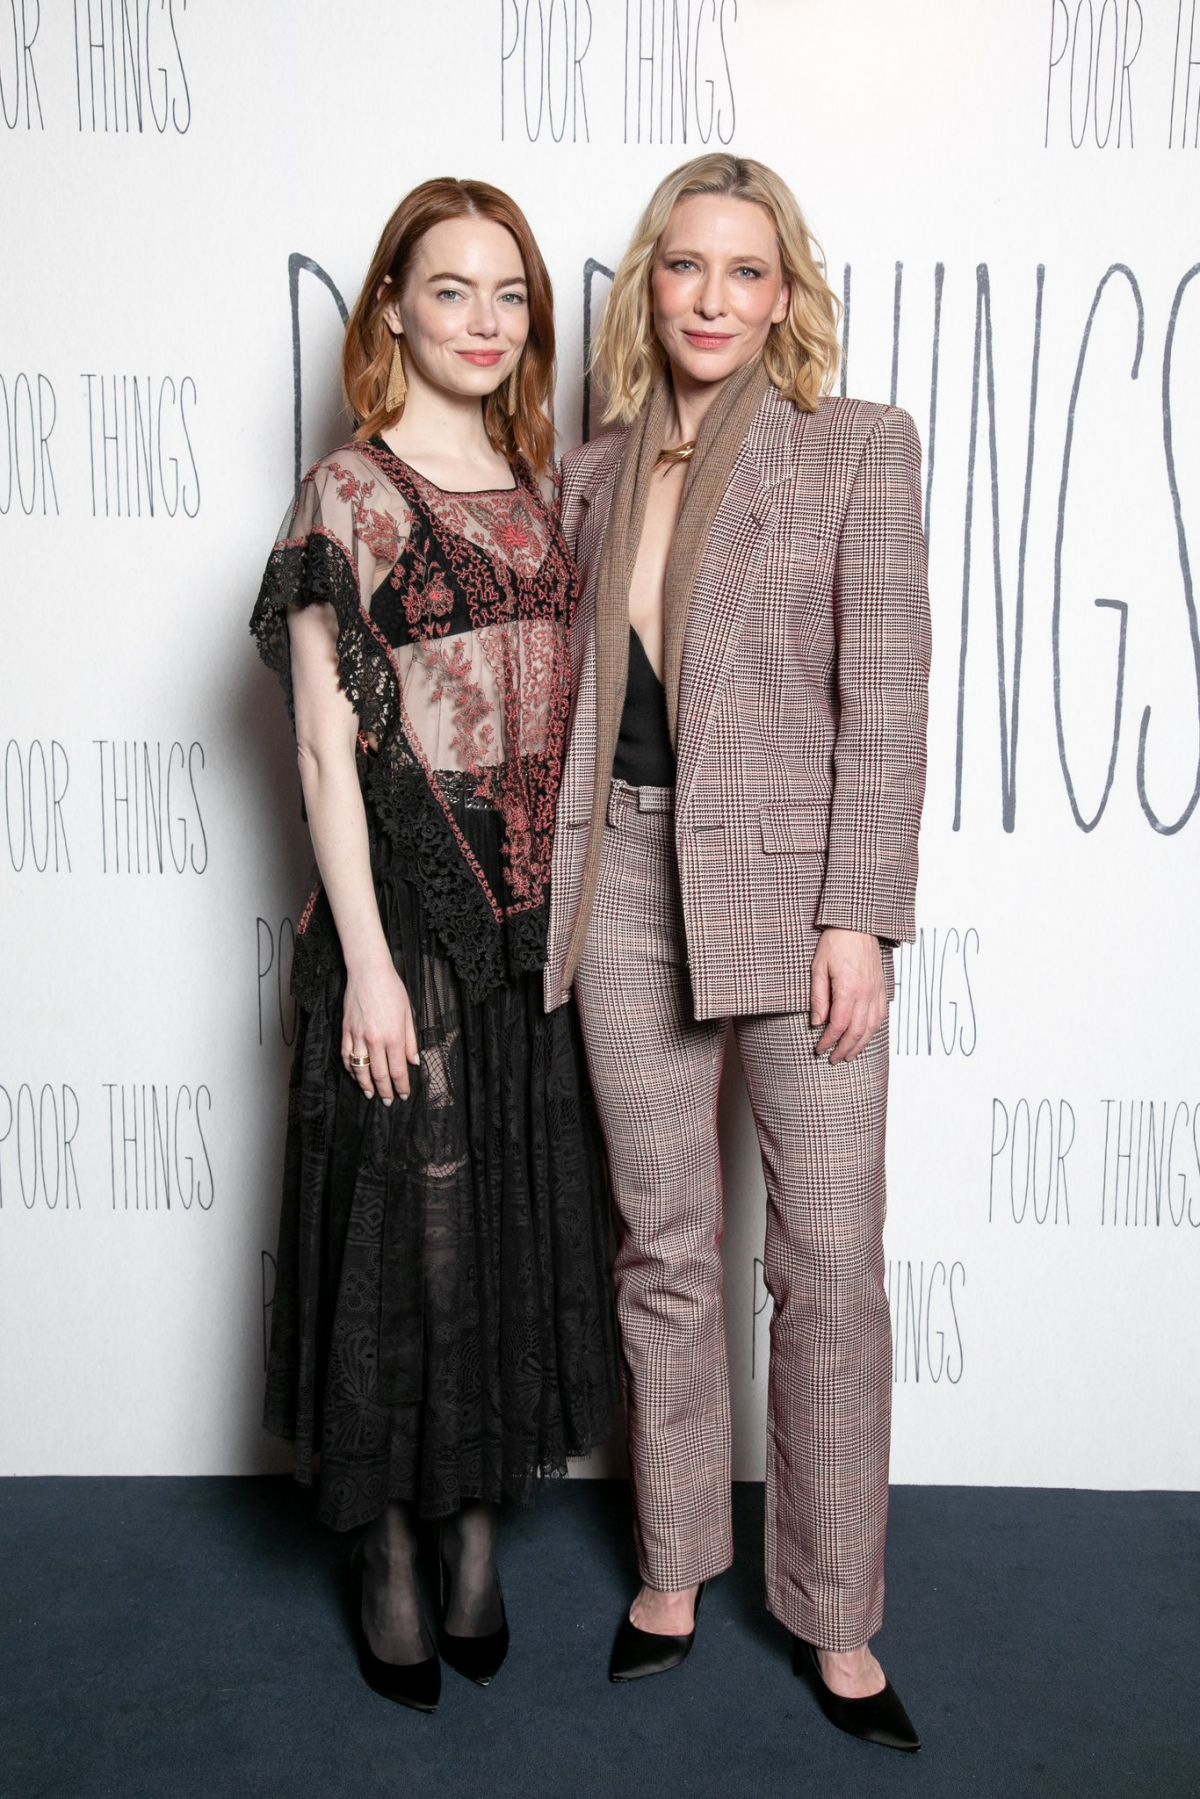 Emma Stone and Cate Blanchett attends at Poor Things Q&A in London 1